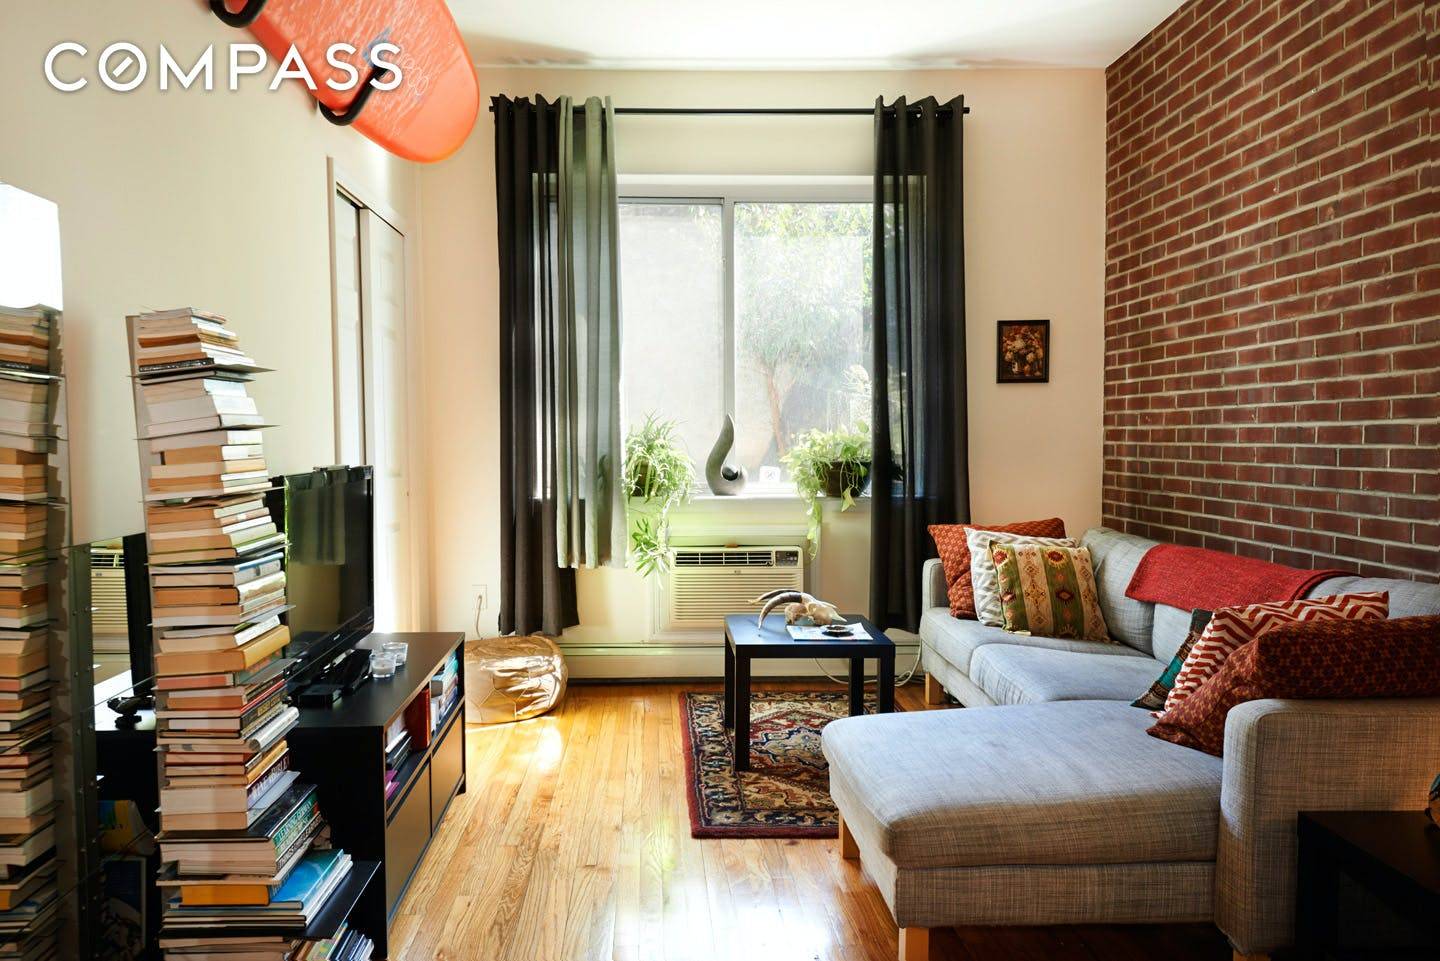 Williamsburg Massive Gut Renovated 2BD 2BA Duplex with Exposed Brick, Stainless Steel Appliances, M W, D W, and Washer Dryer This incredible duplex boasts a huge living room on the ...